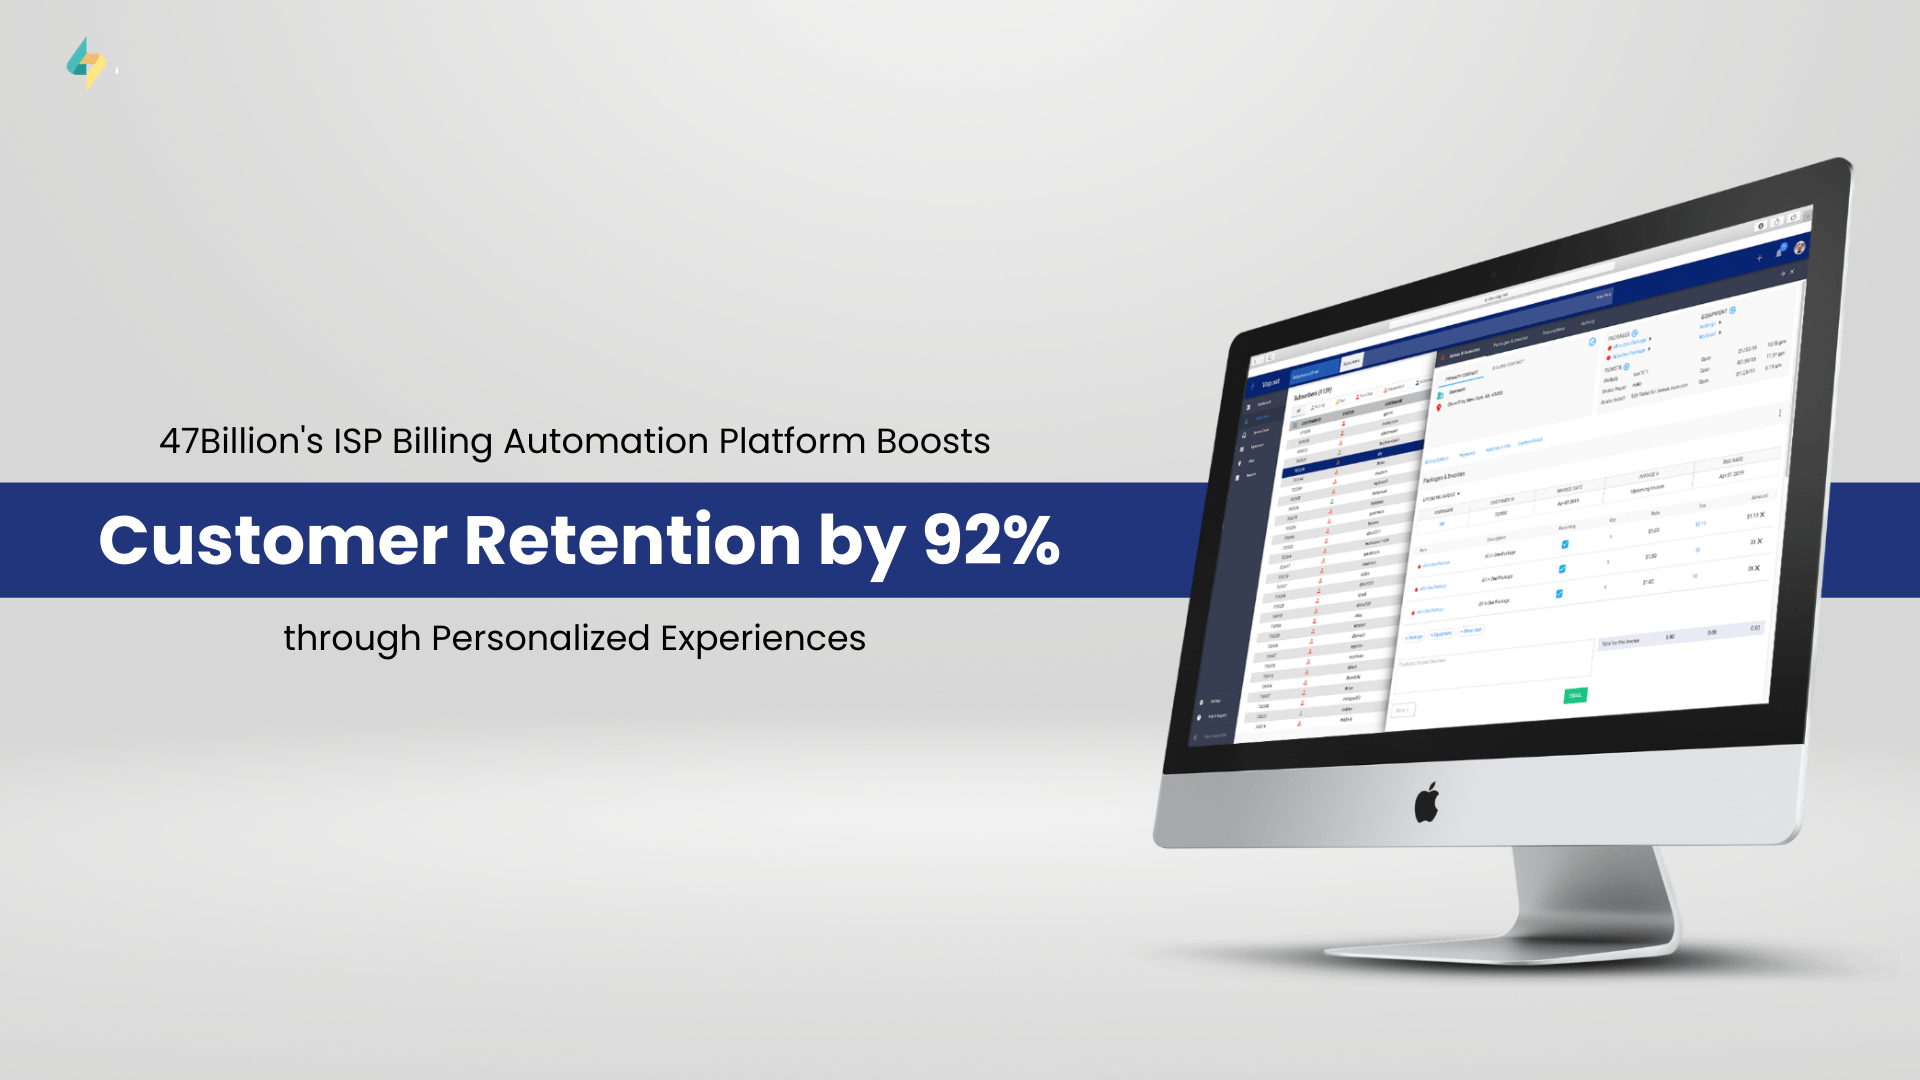 47Billion’s ISP Billing Automation Platform Boosts WISPs’ Customer Retention by 92% through Personalized Experiences